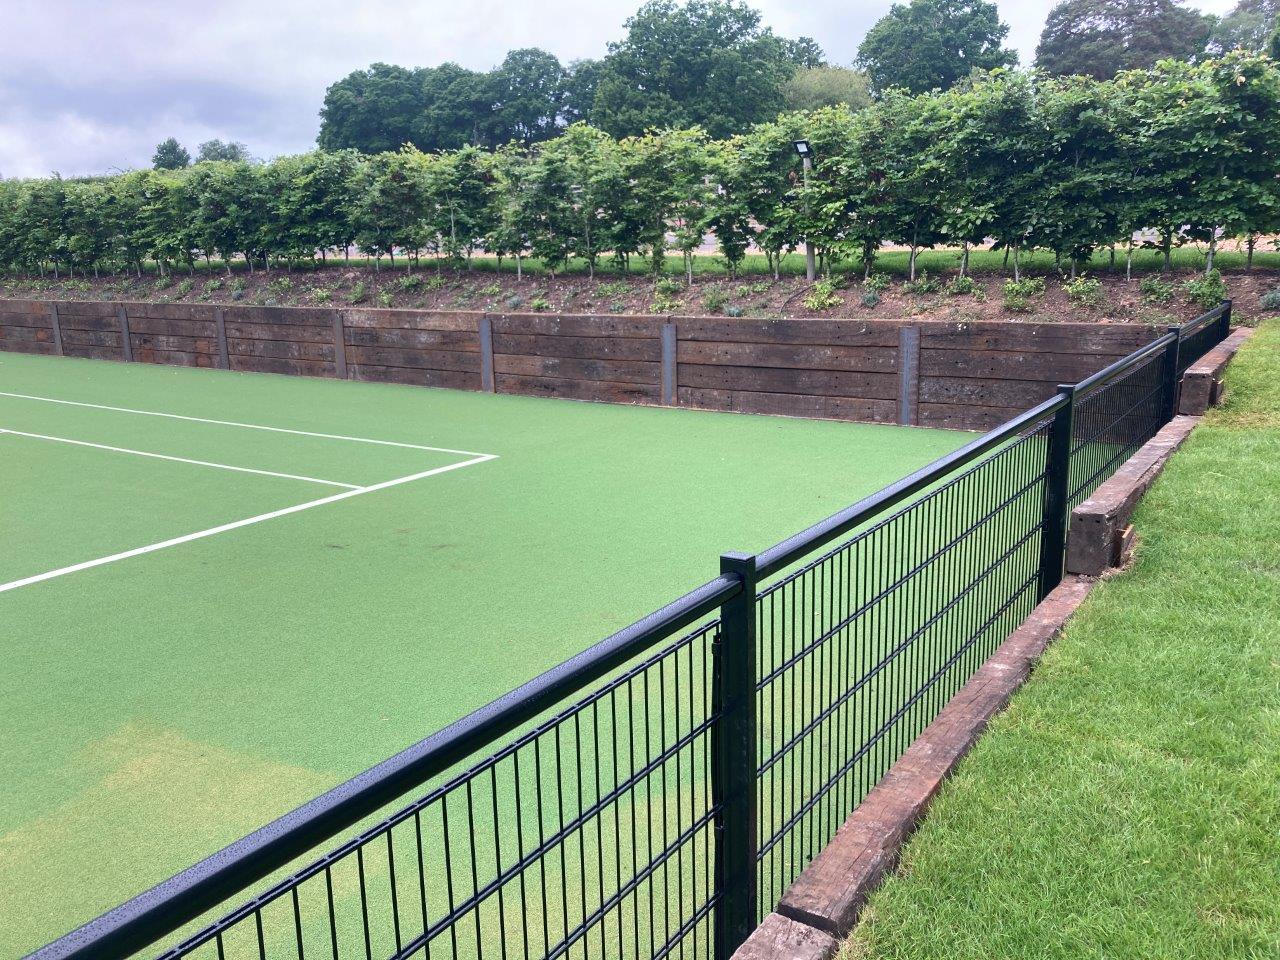 Carpeted tennis court